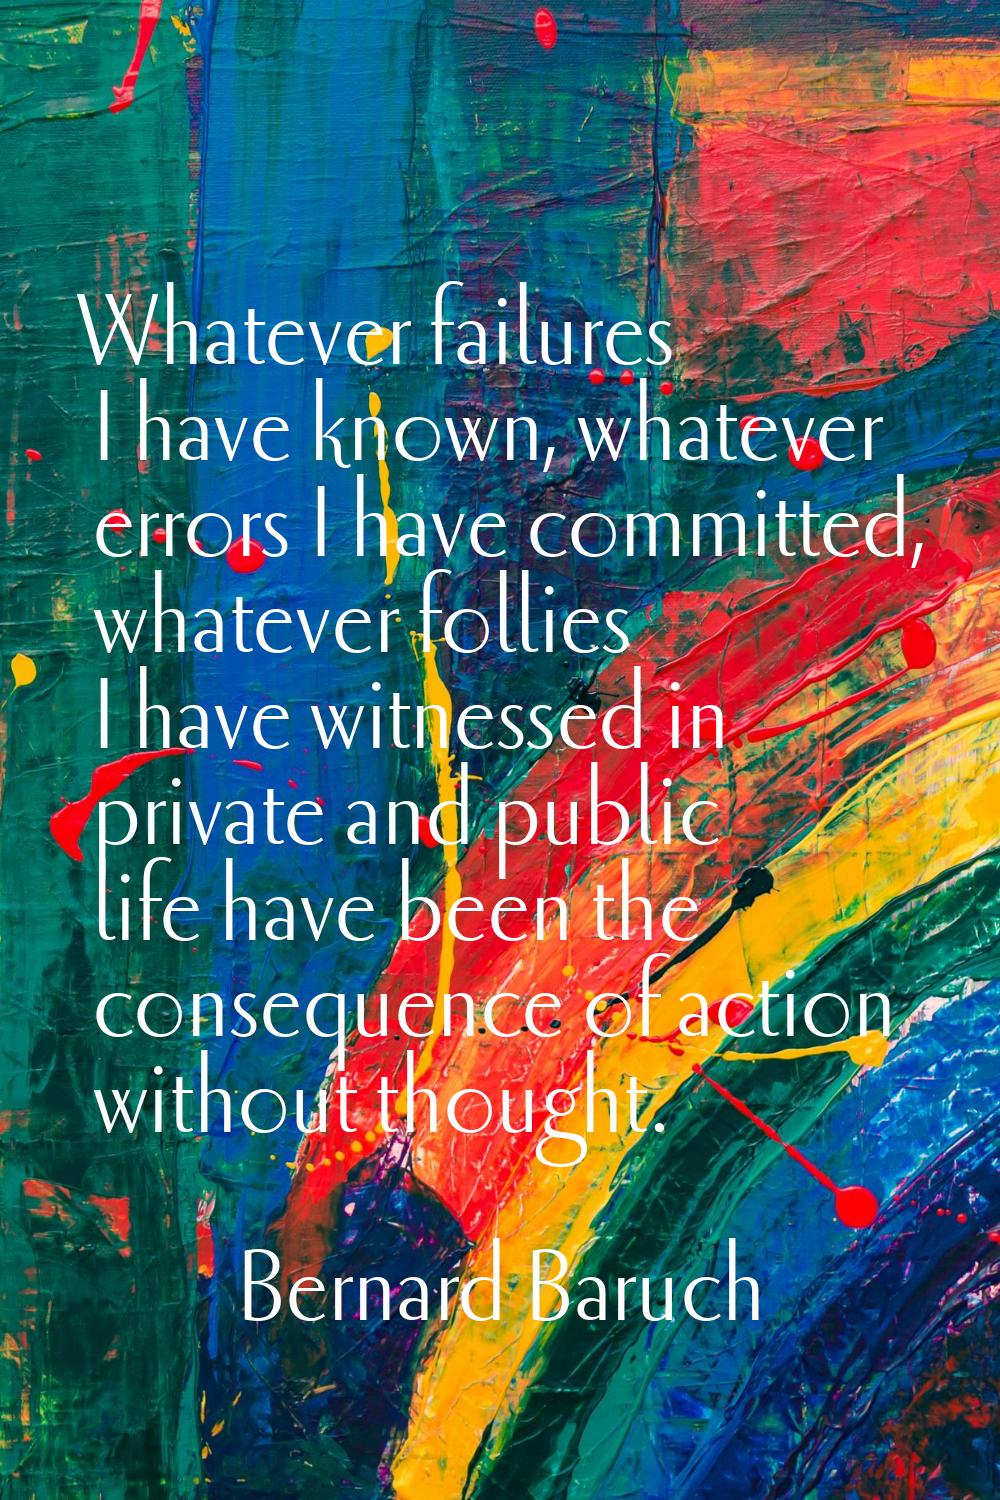 Whatever failures I have known, whatever errors I have committed, whatever follies I have witnessed